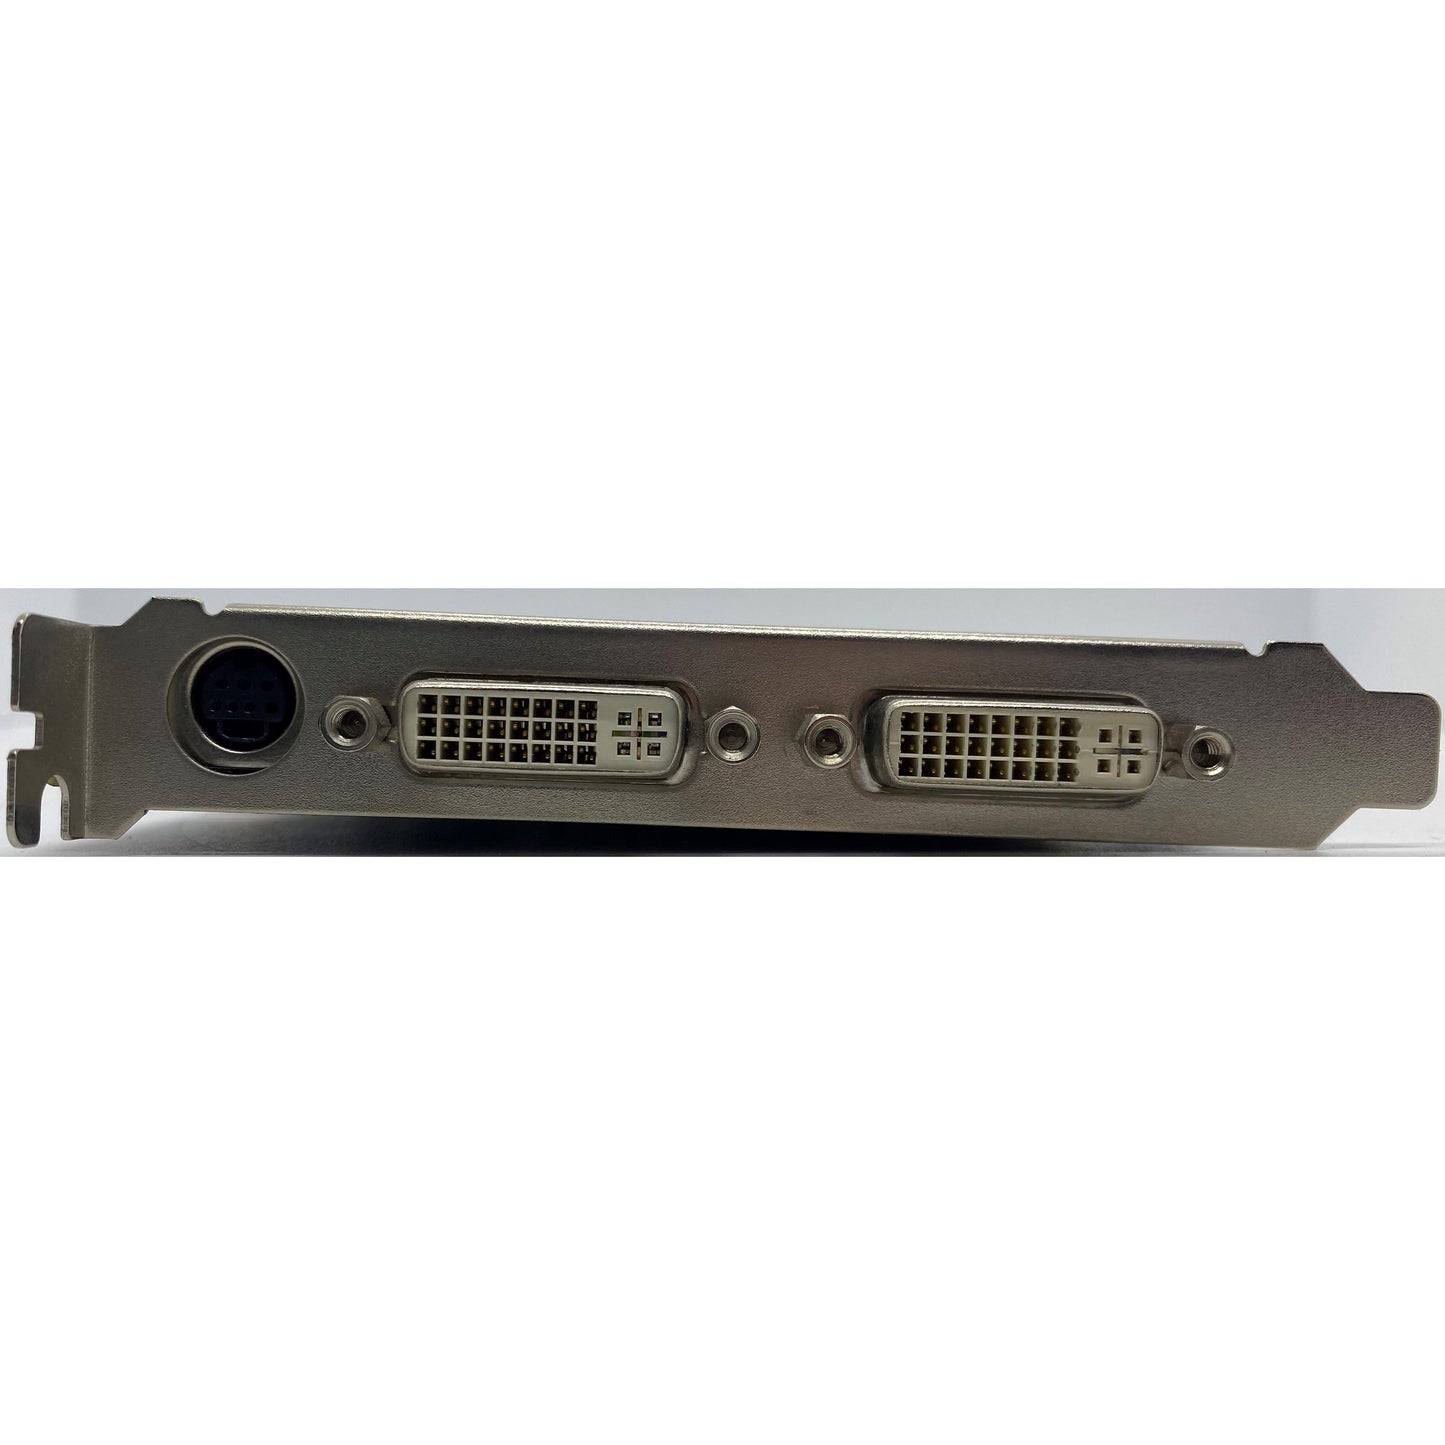 Point of View GeForce 7600GT R-VGA150812 | 256MB GDDR3 | TV-OUT DVI